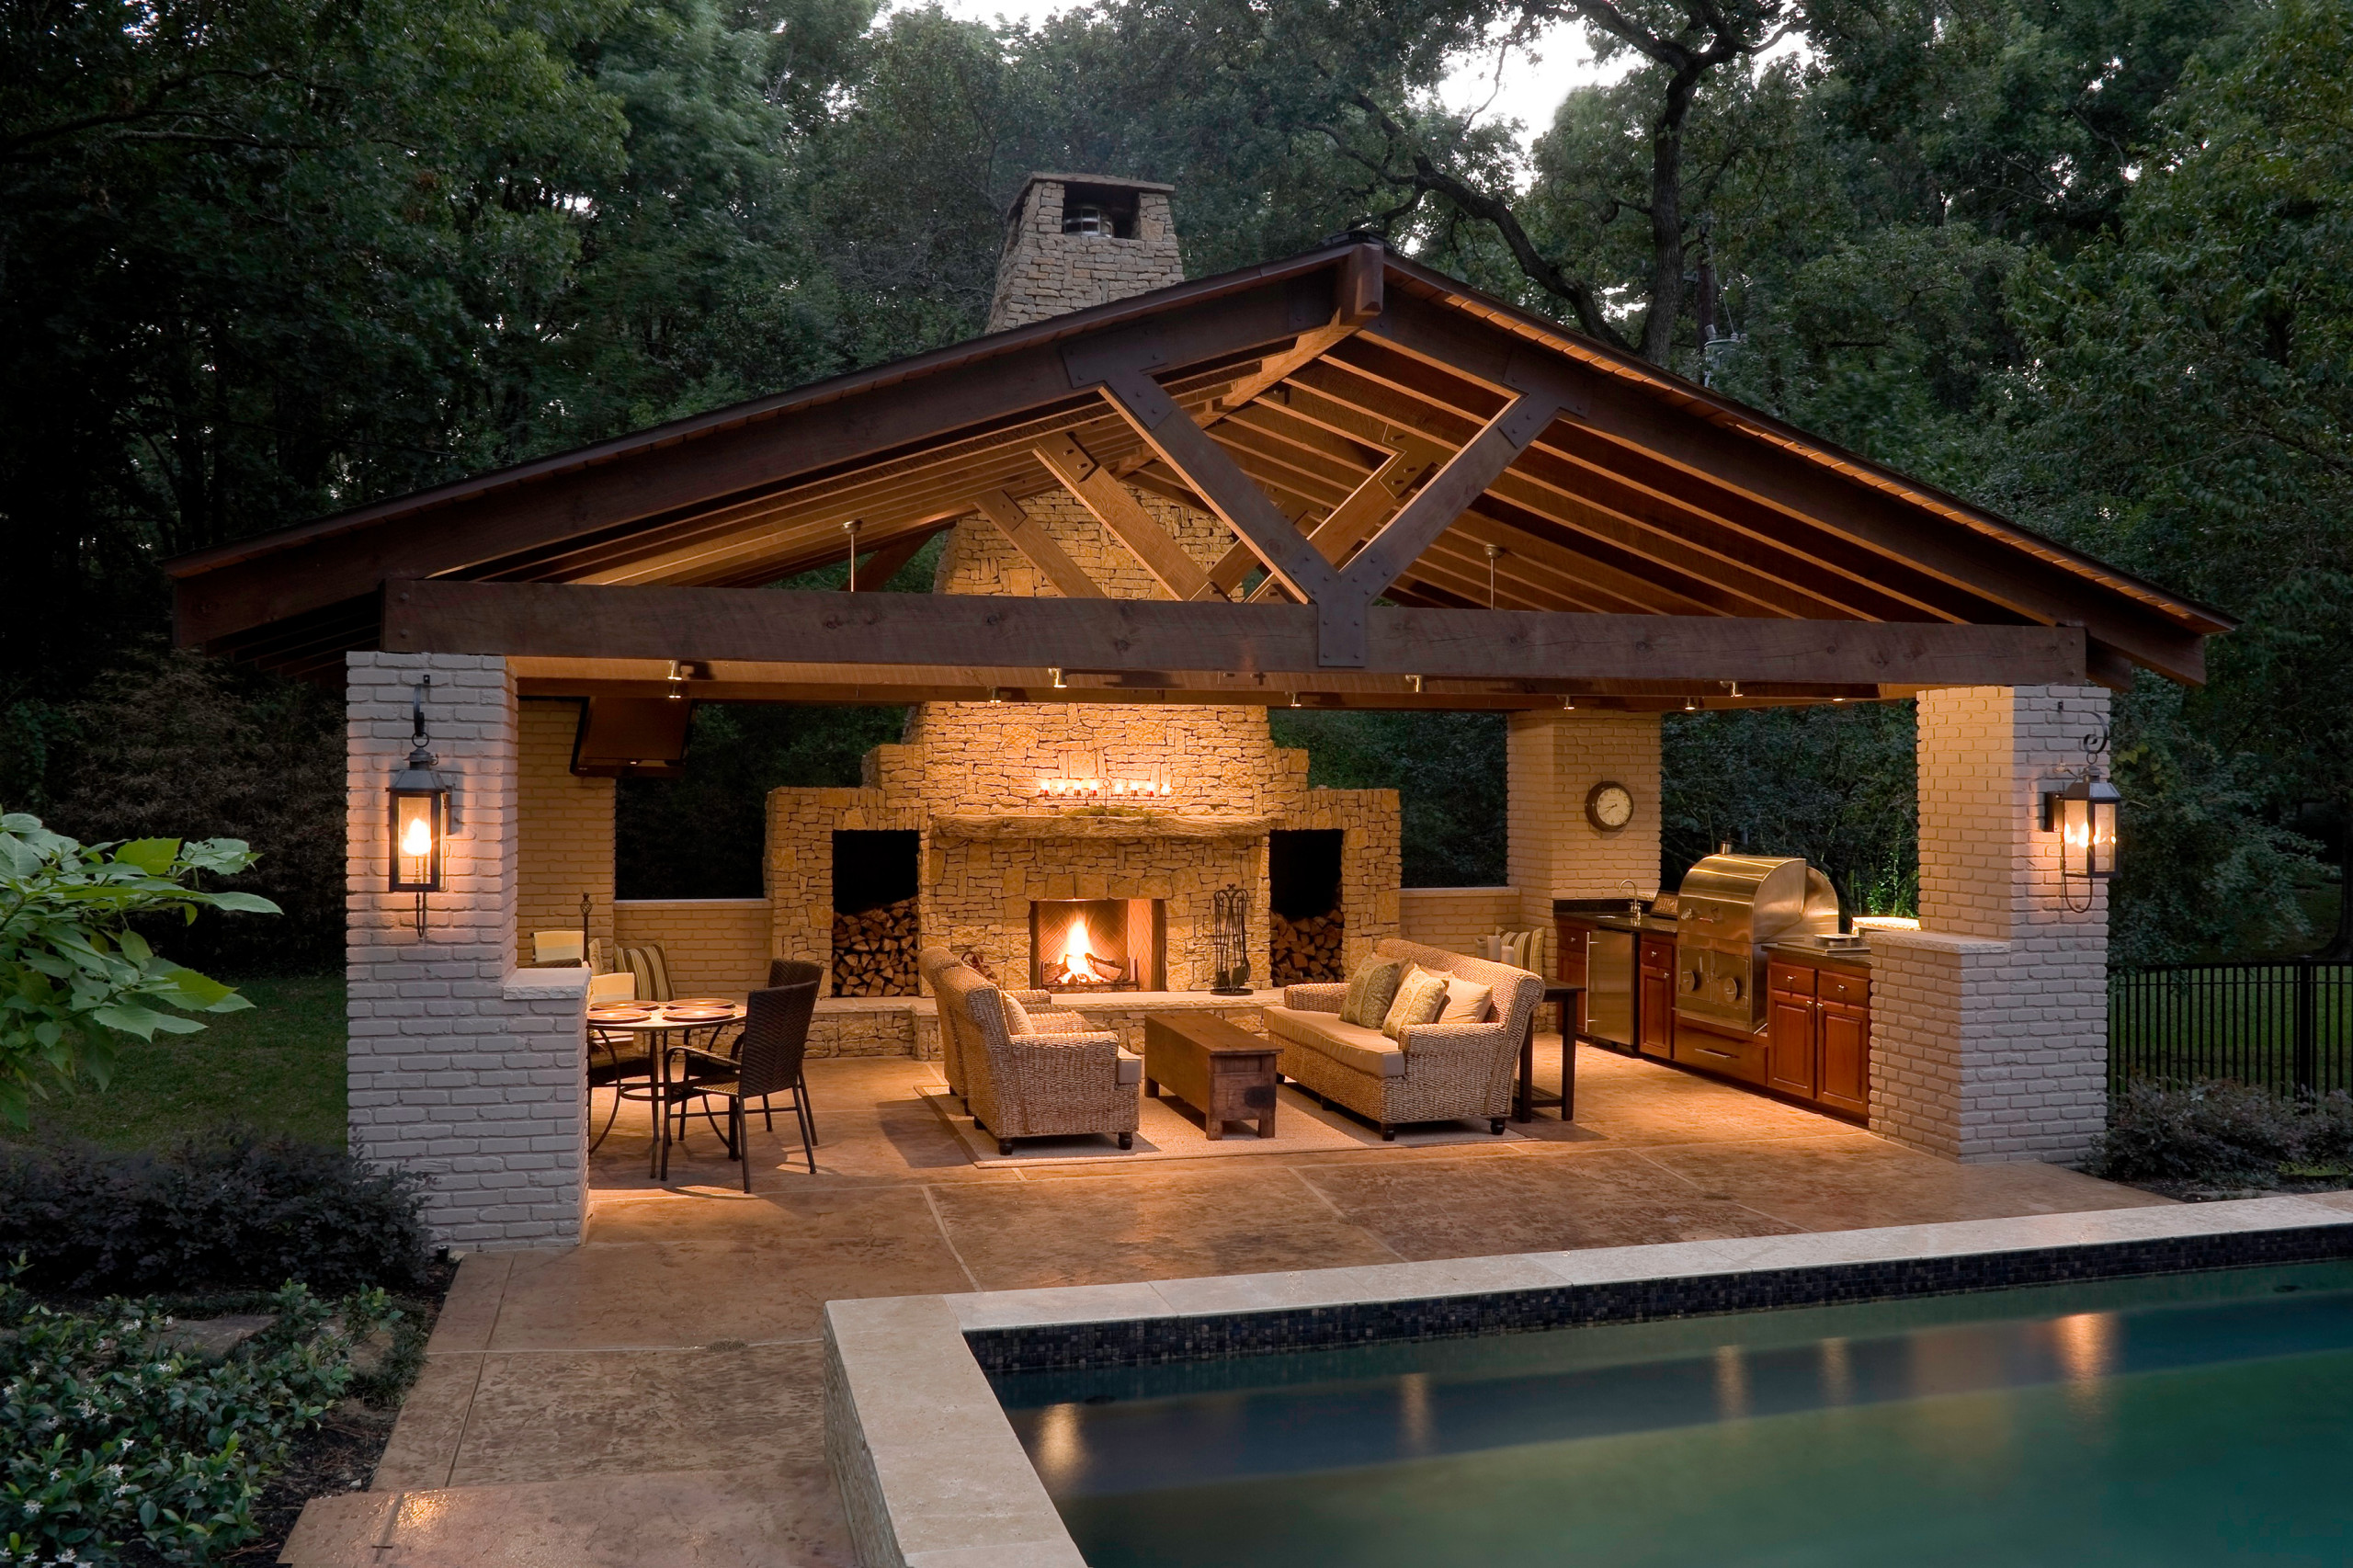 Patio With A Fire Pit And Gazebo, Gazebo With Fire Pit Plans